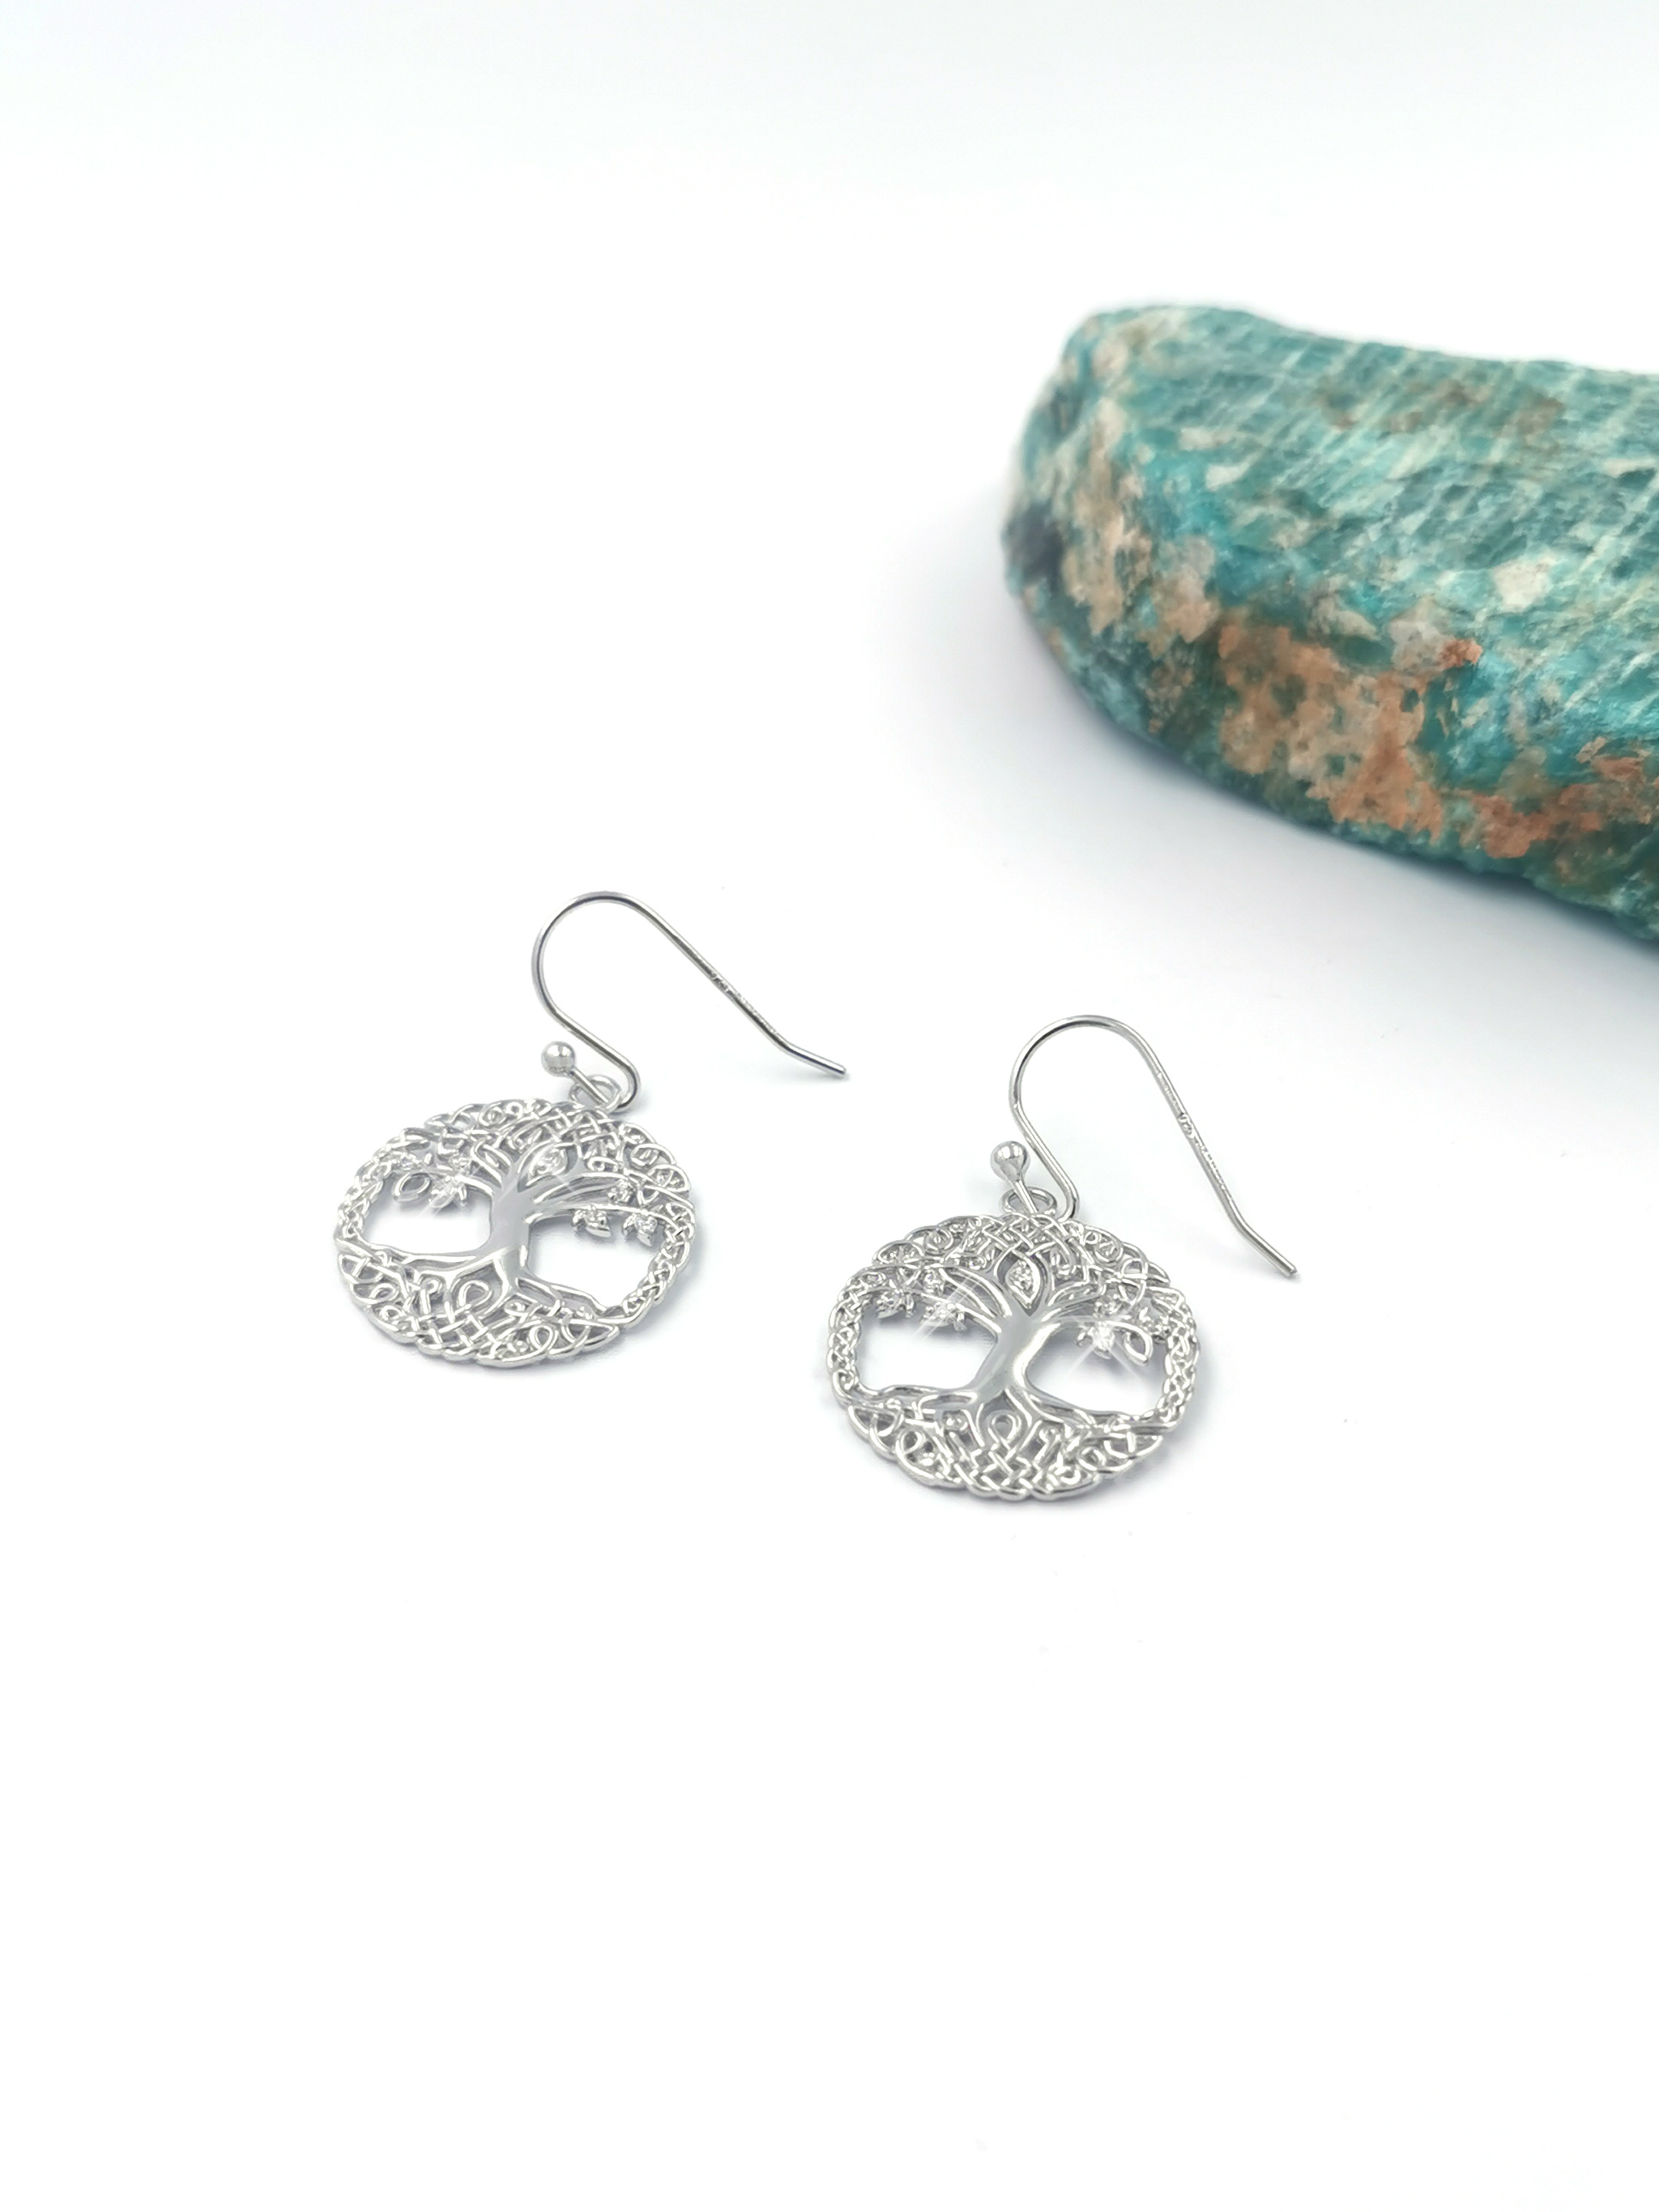 Silver Celtic Tree of Life Earrings, Made in Ireland